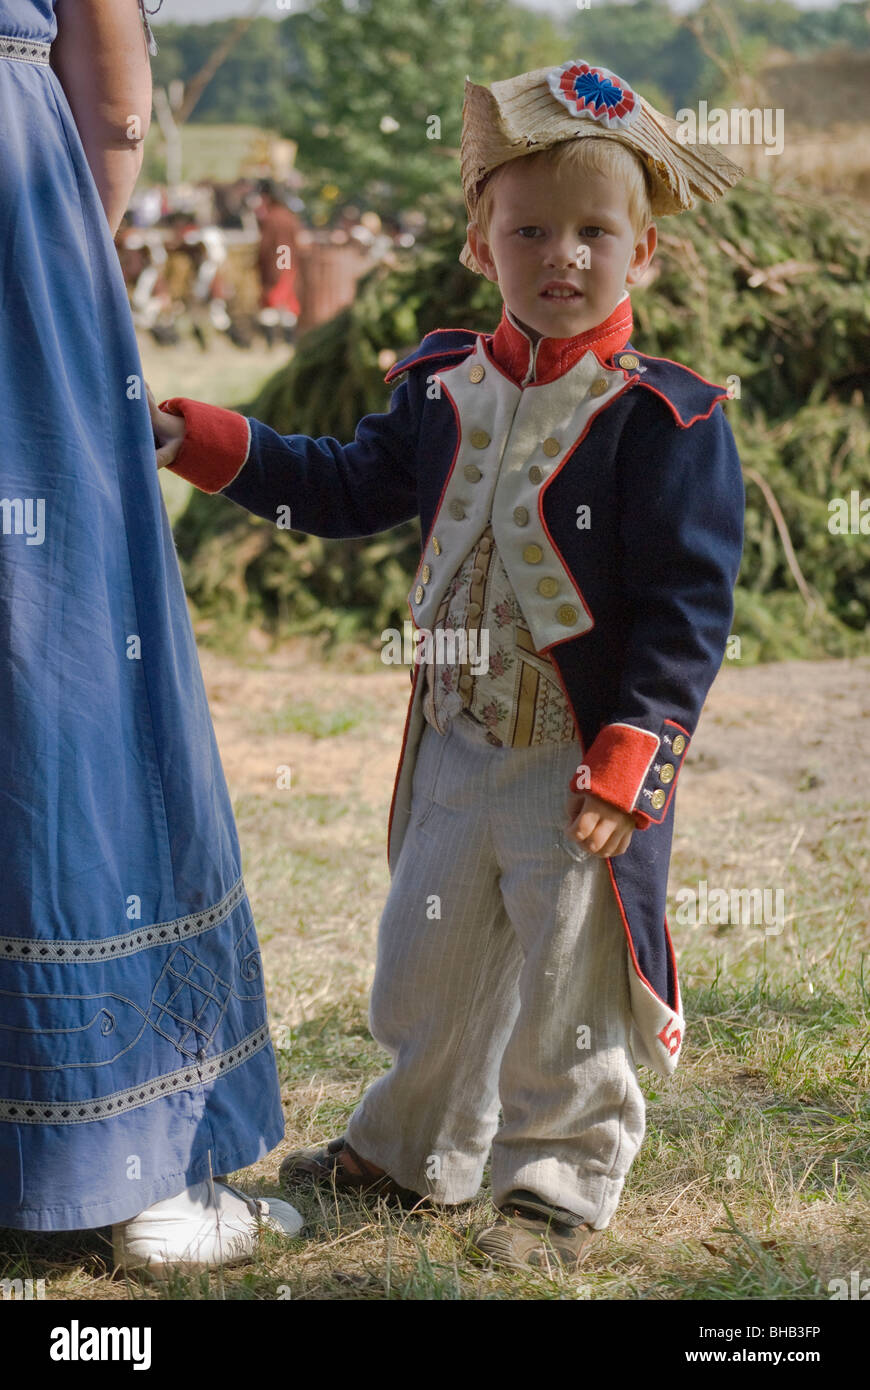 Child holding to mother's dress at Reenactment of Siege of Neisse during 1807 Napoleonic War with Prussia in Nysa, Poland Stock Photo